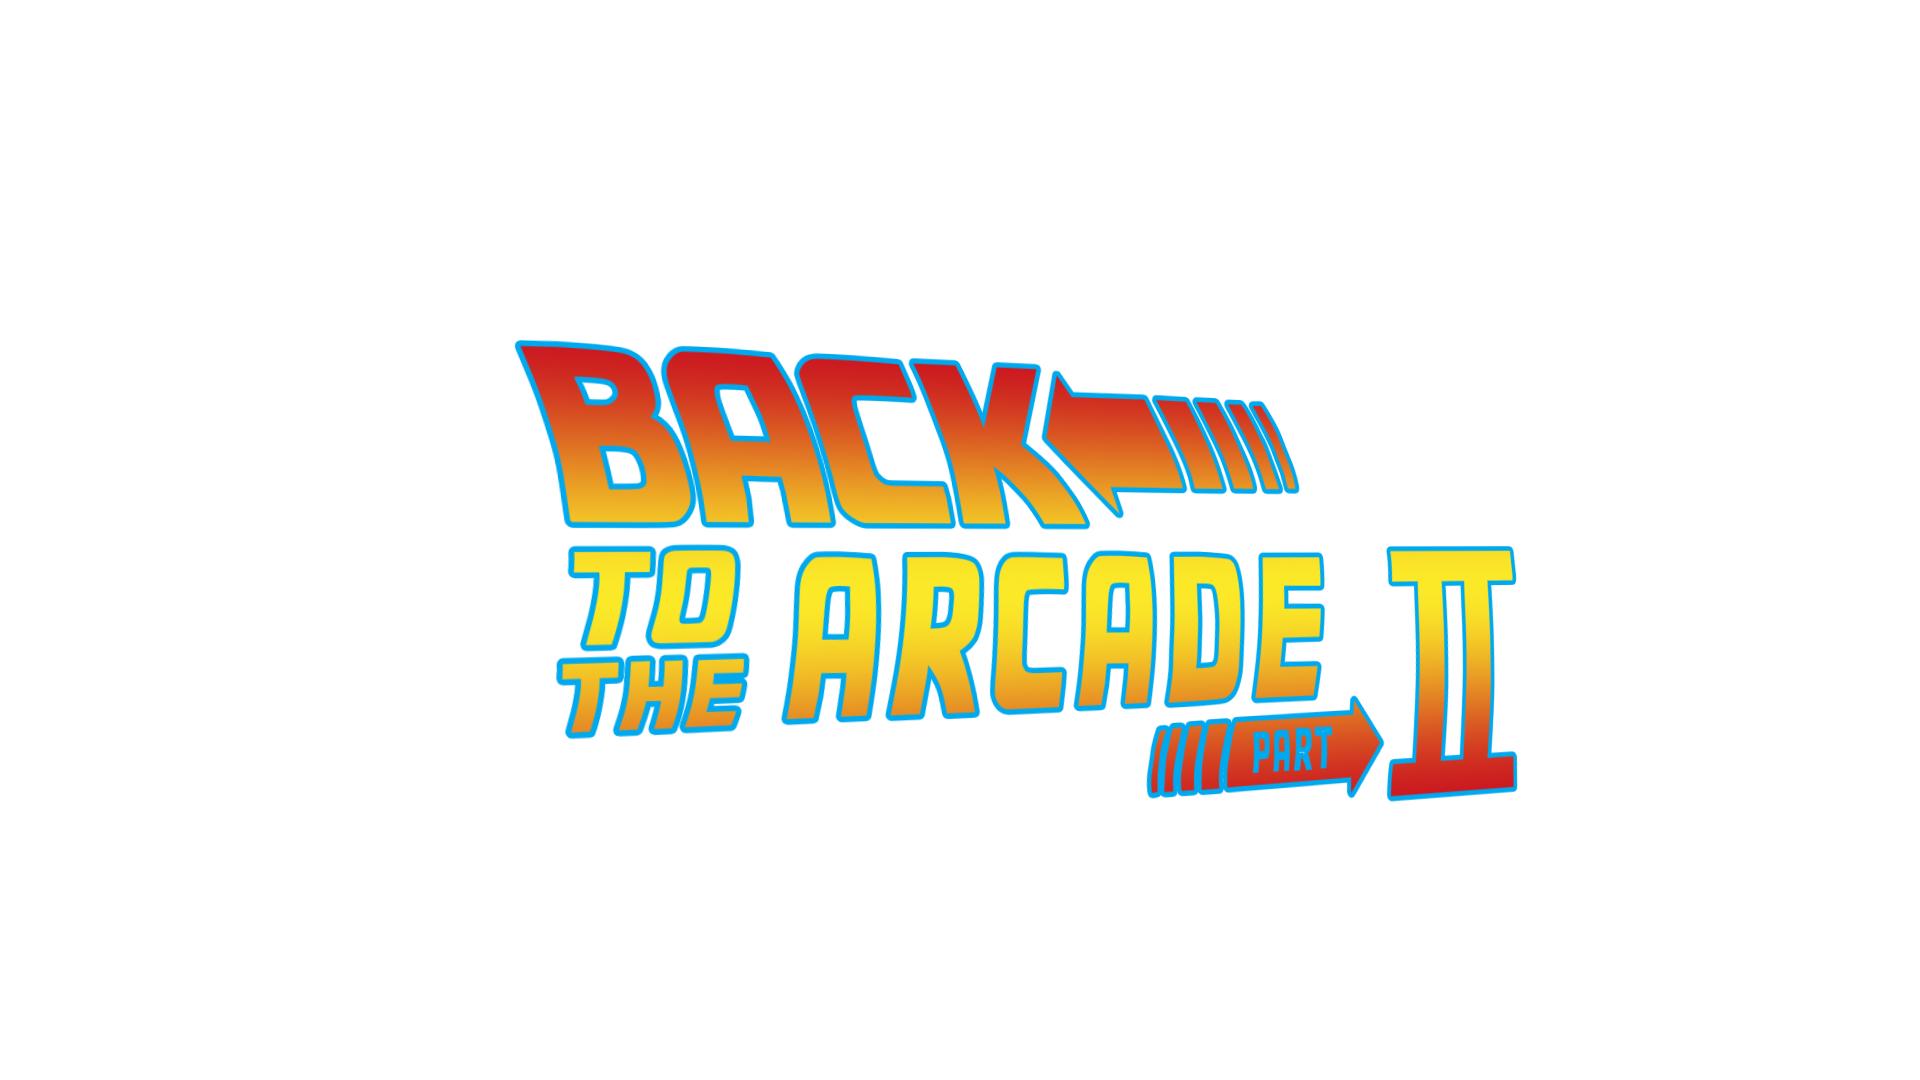 More information about "Back To The Arcade Part 2 Deluxe"